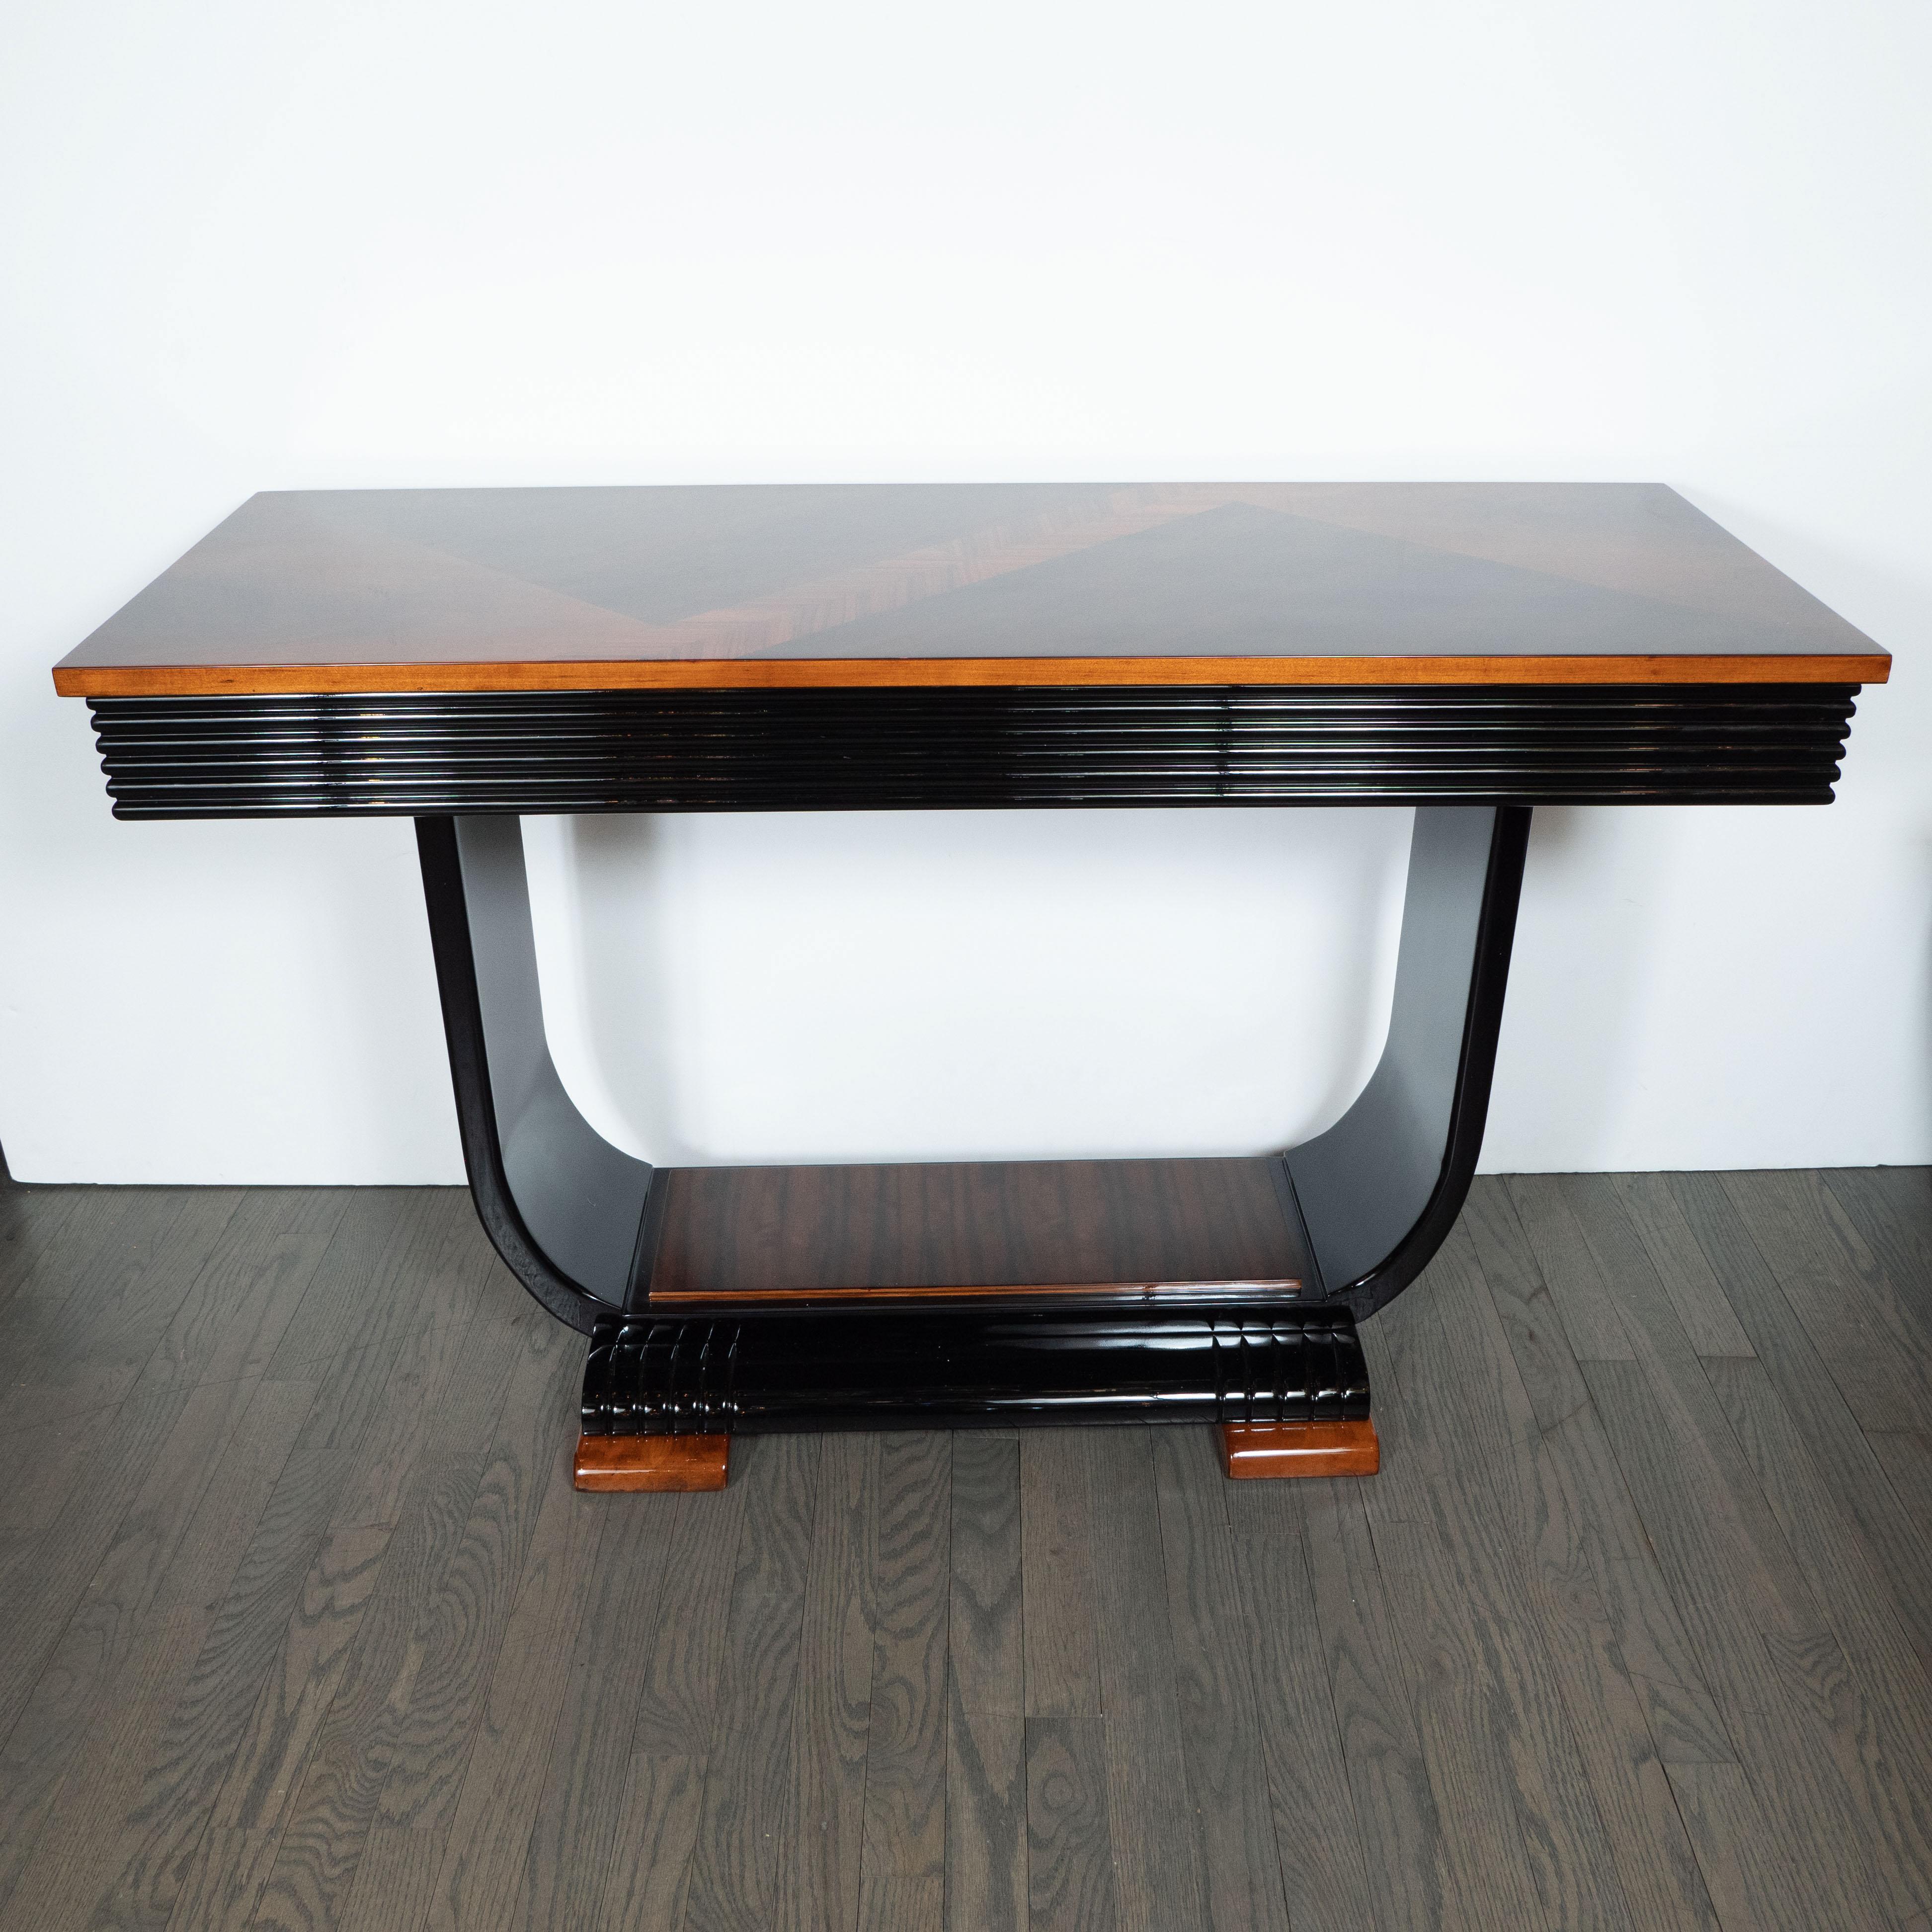 Art Deco Streamlined Black Lacquer, Bookmatched Walnut & Rosewood Console Table (amerikanisch)